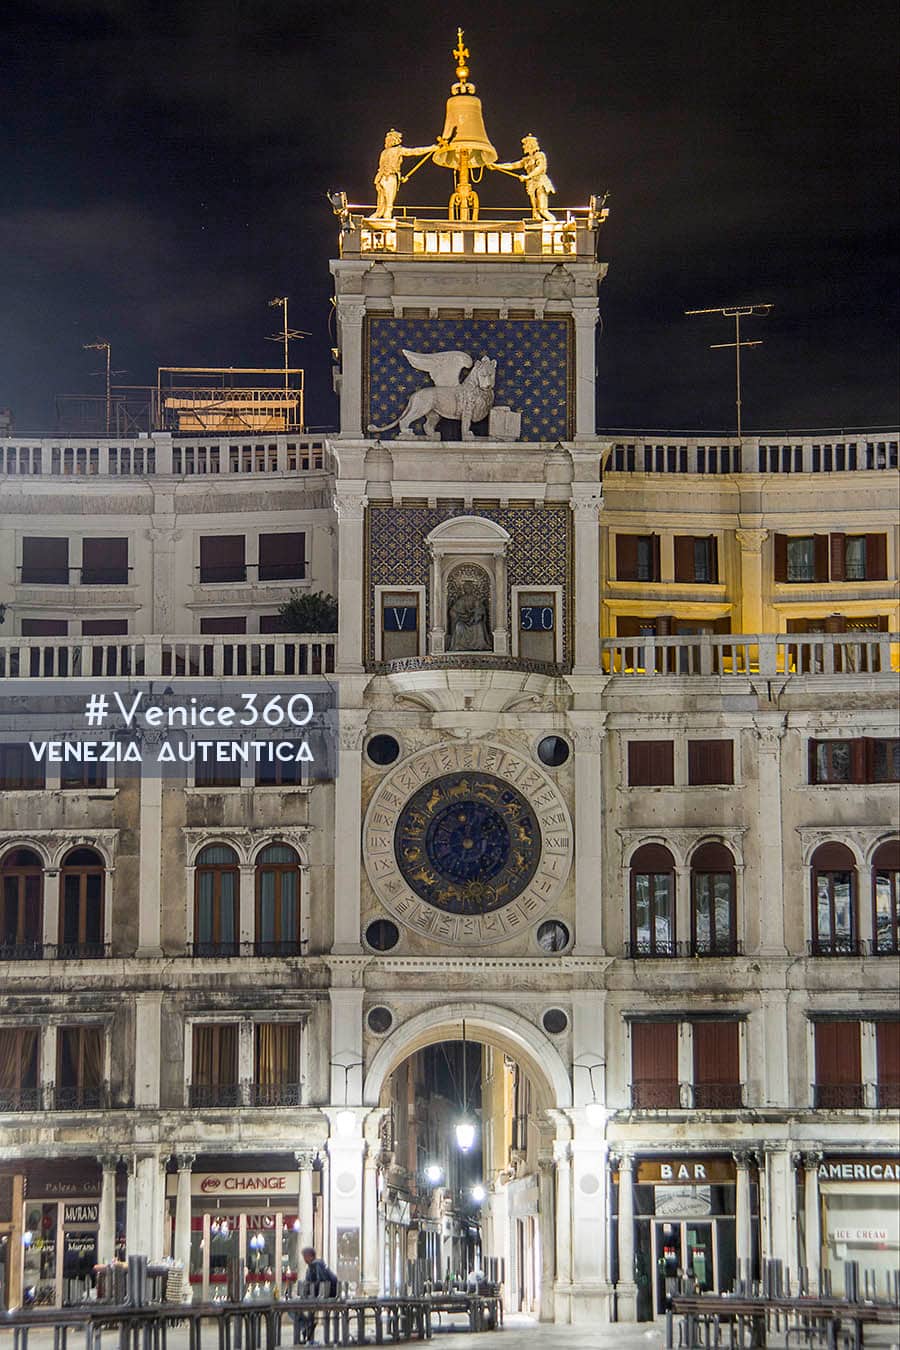 This will change the way you look at the clock tower in St Mark's Square - Venezia Autentica | Discover and Support the Authentic Venice - One of the jewels of San Marco, too often overlooked, is the Torre dell’Orologio. The Clock Tower, which was built from 1496 to 1499, is located in a strategical position allowing it to be seen from the water and underlying once more the importance of the seas to the city of Venice.